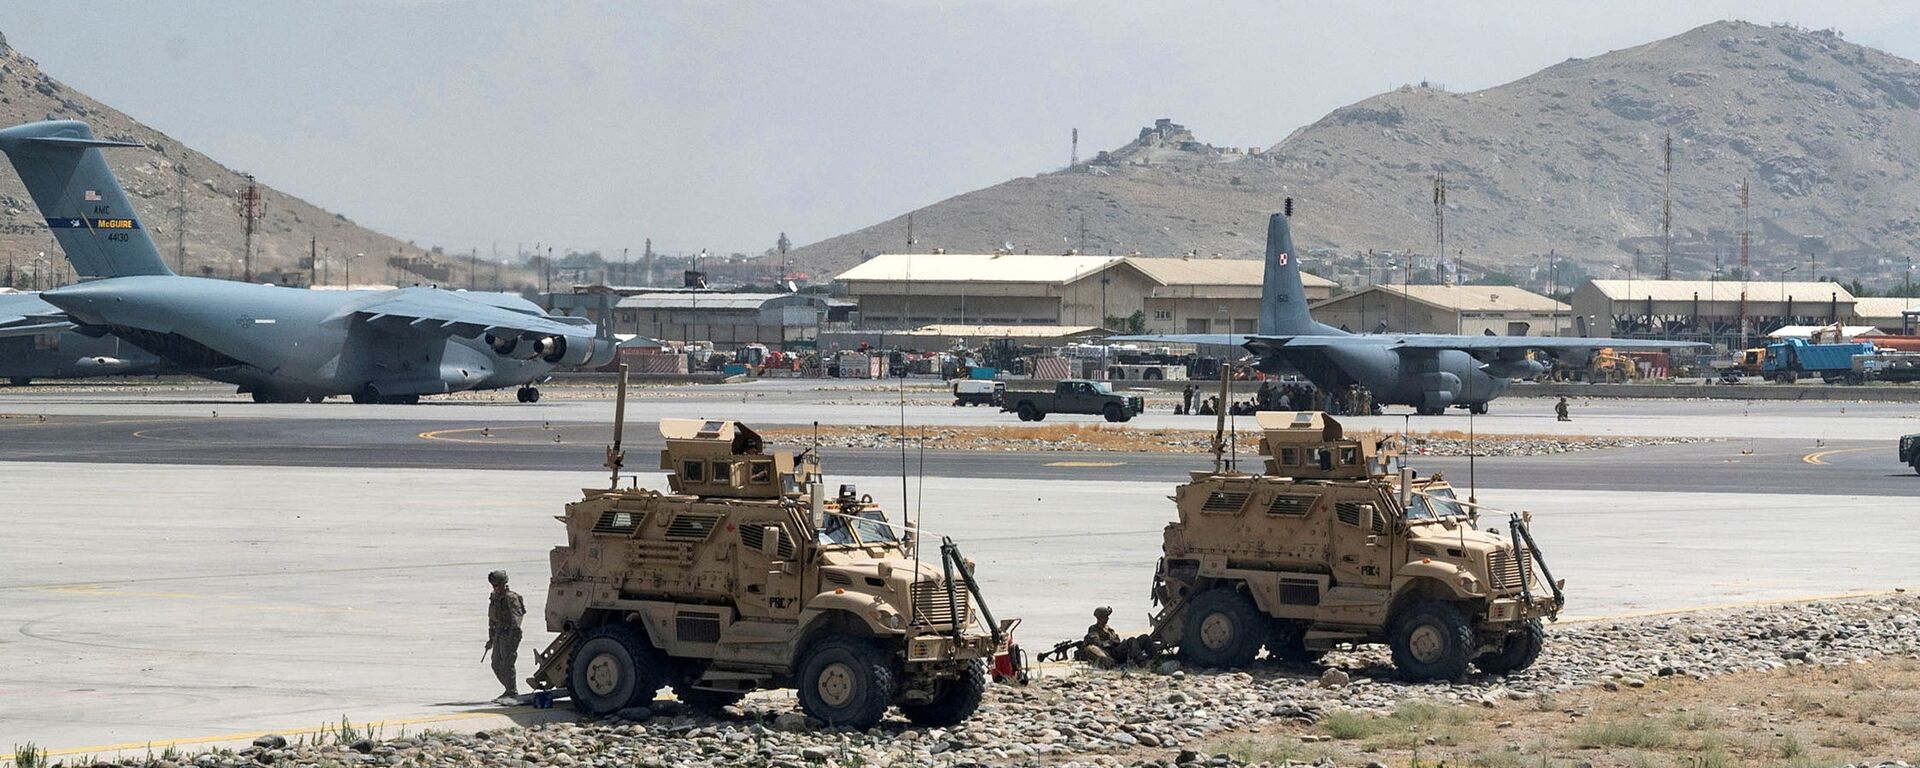 FILE PHOTO: FILE PHOTO: U.S. Army soldiers assigned to the 82nd Airborne Division patrol Hamid Karzai International Airport in Kabul, Afghanistan August 17, 2021. Picture taken August 17, 2021.  U.S. Air Force/Senior Airman Taylor Crul/Handout via REUTERS  THIS IMAGE HAS BEEN SUPPLIED BY A THIRD PARTY. THIS PICTURE WAS PROCESSED BY REUTERS TO ENHANCE QUALITY. AN UNPROCESSED VERSION HAS BEEN PROVIDED SEPARATELY./File Photo/File Photo - Sputnik International, 1920